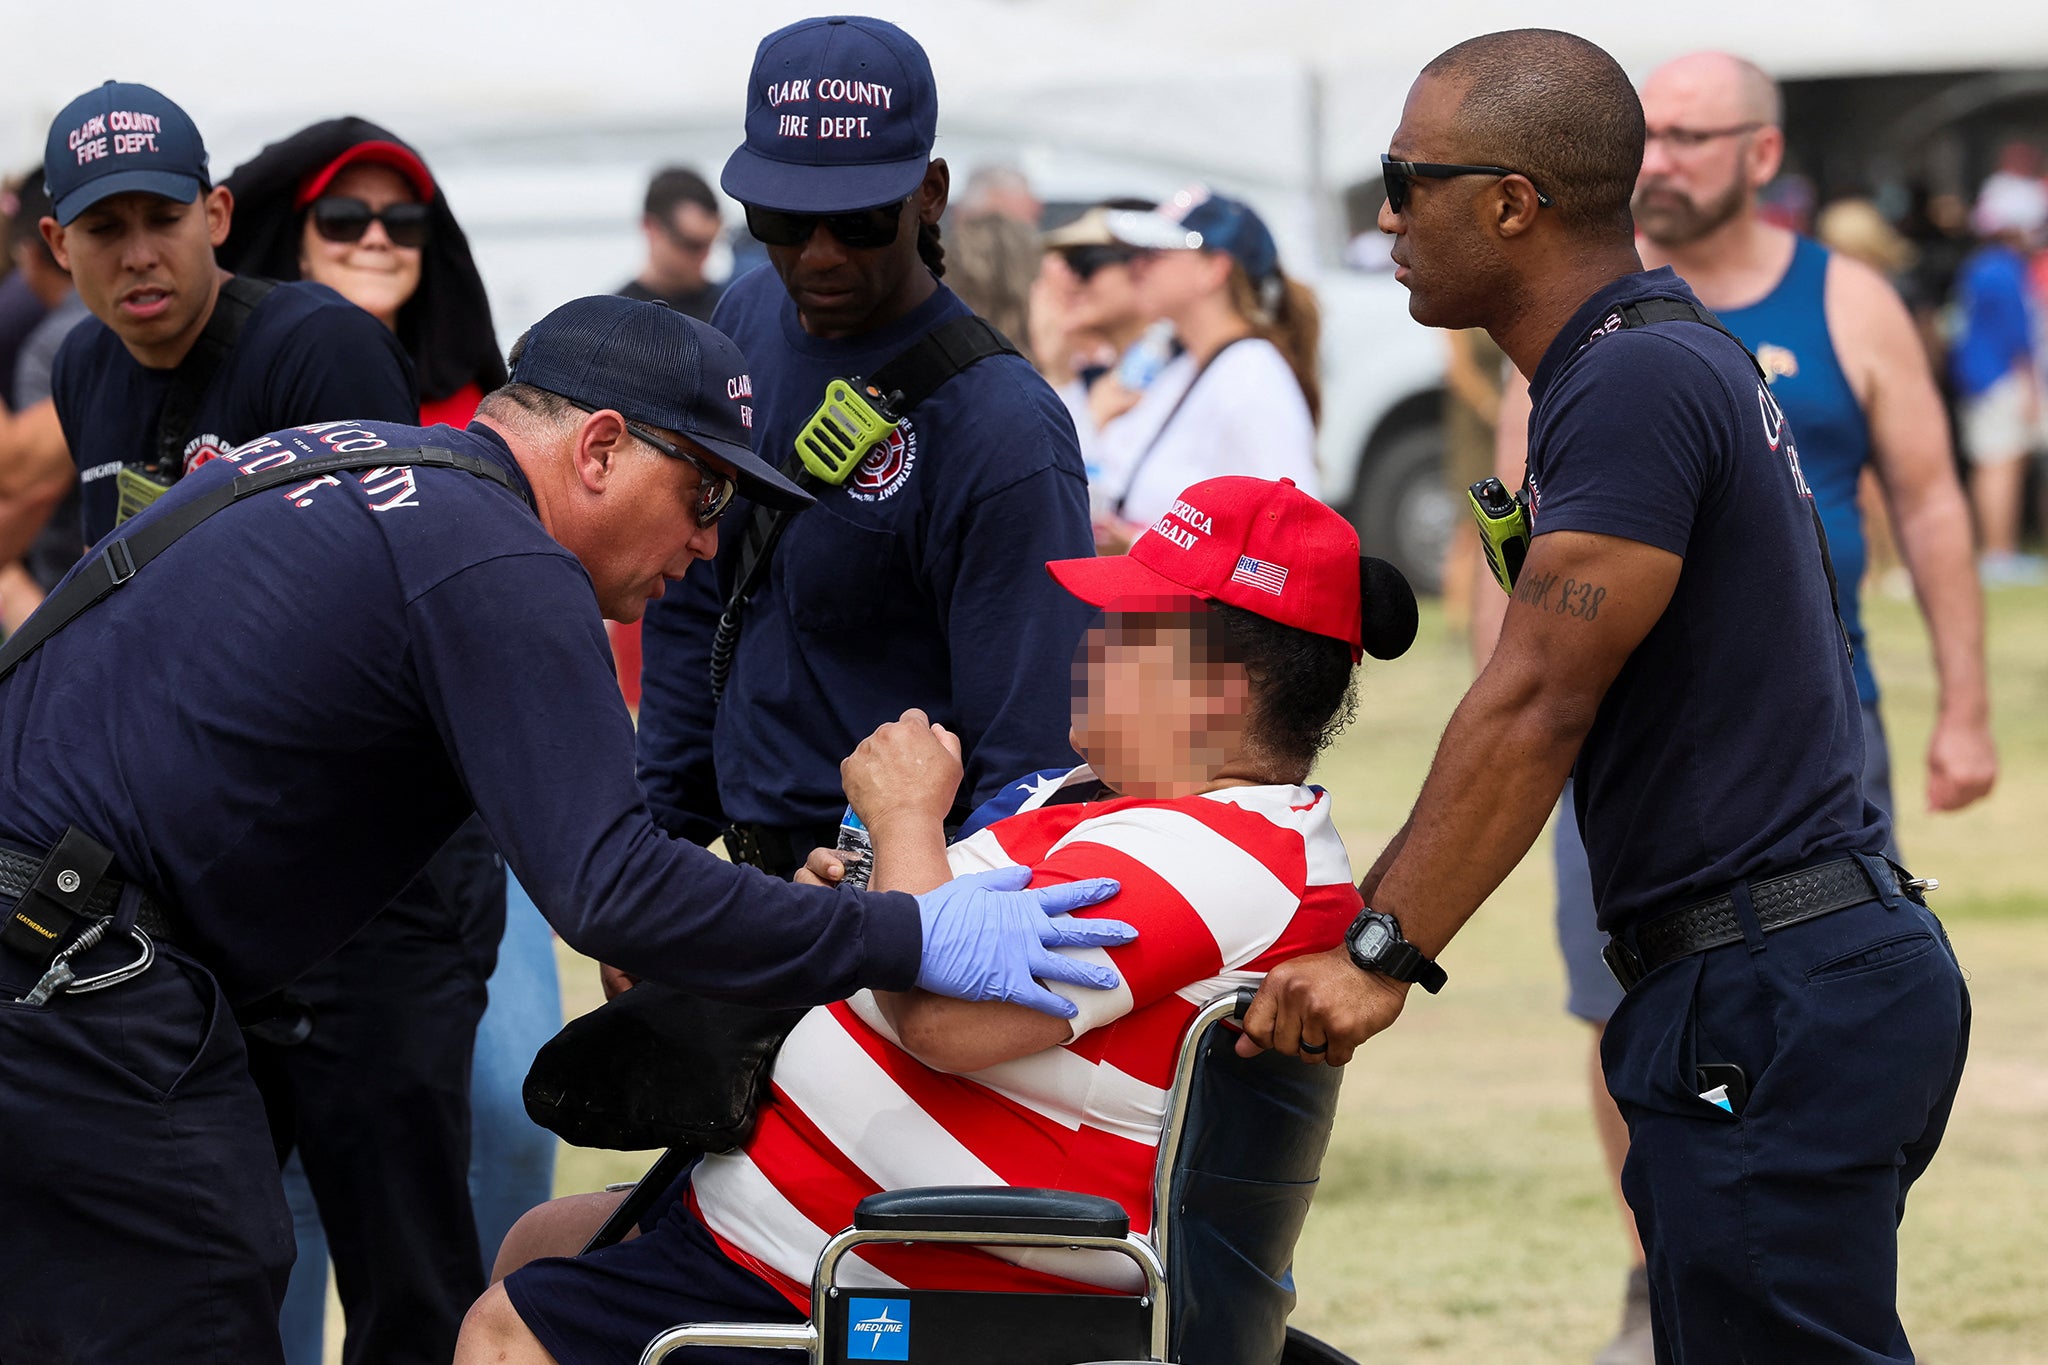 Six people were hospitalized following Donald Trump’s rally in Las Vegas on Sunday, after temperatures reached over 100F